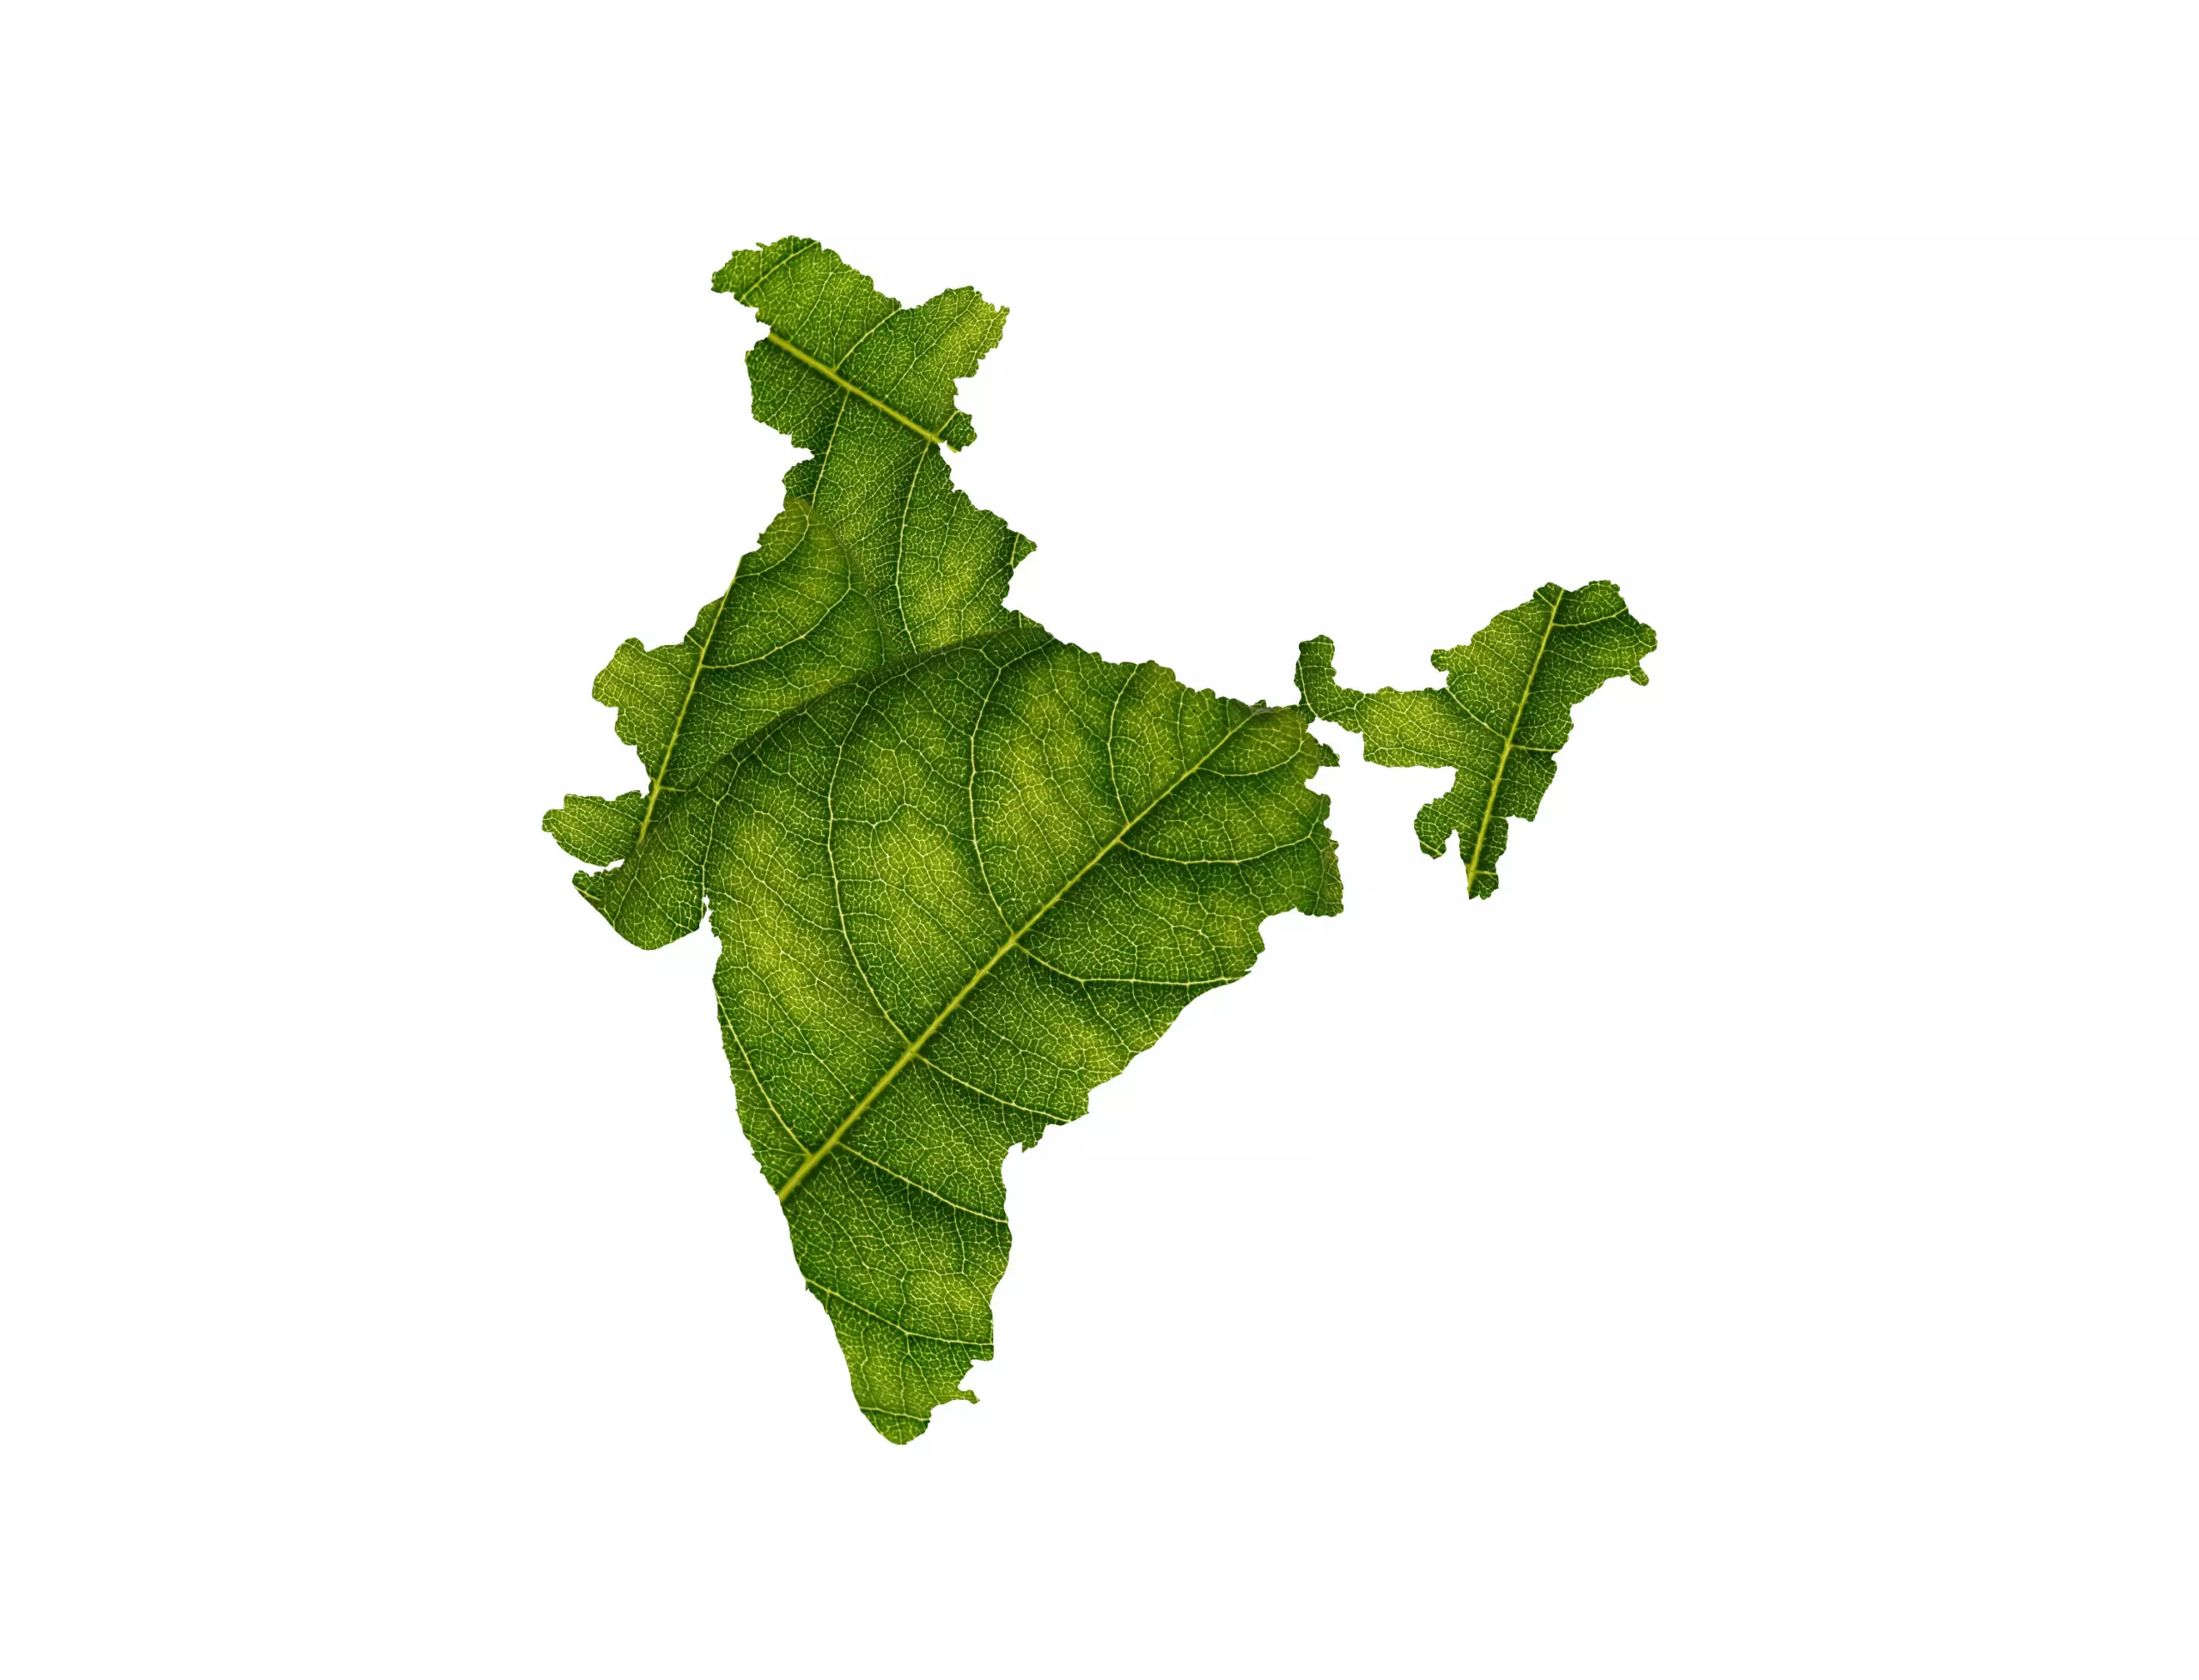 Biofuels for a Greener India: Policies and Approaches to Encourage Adoption